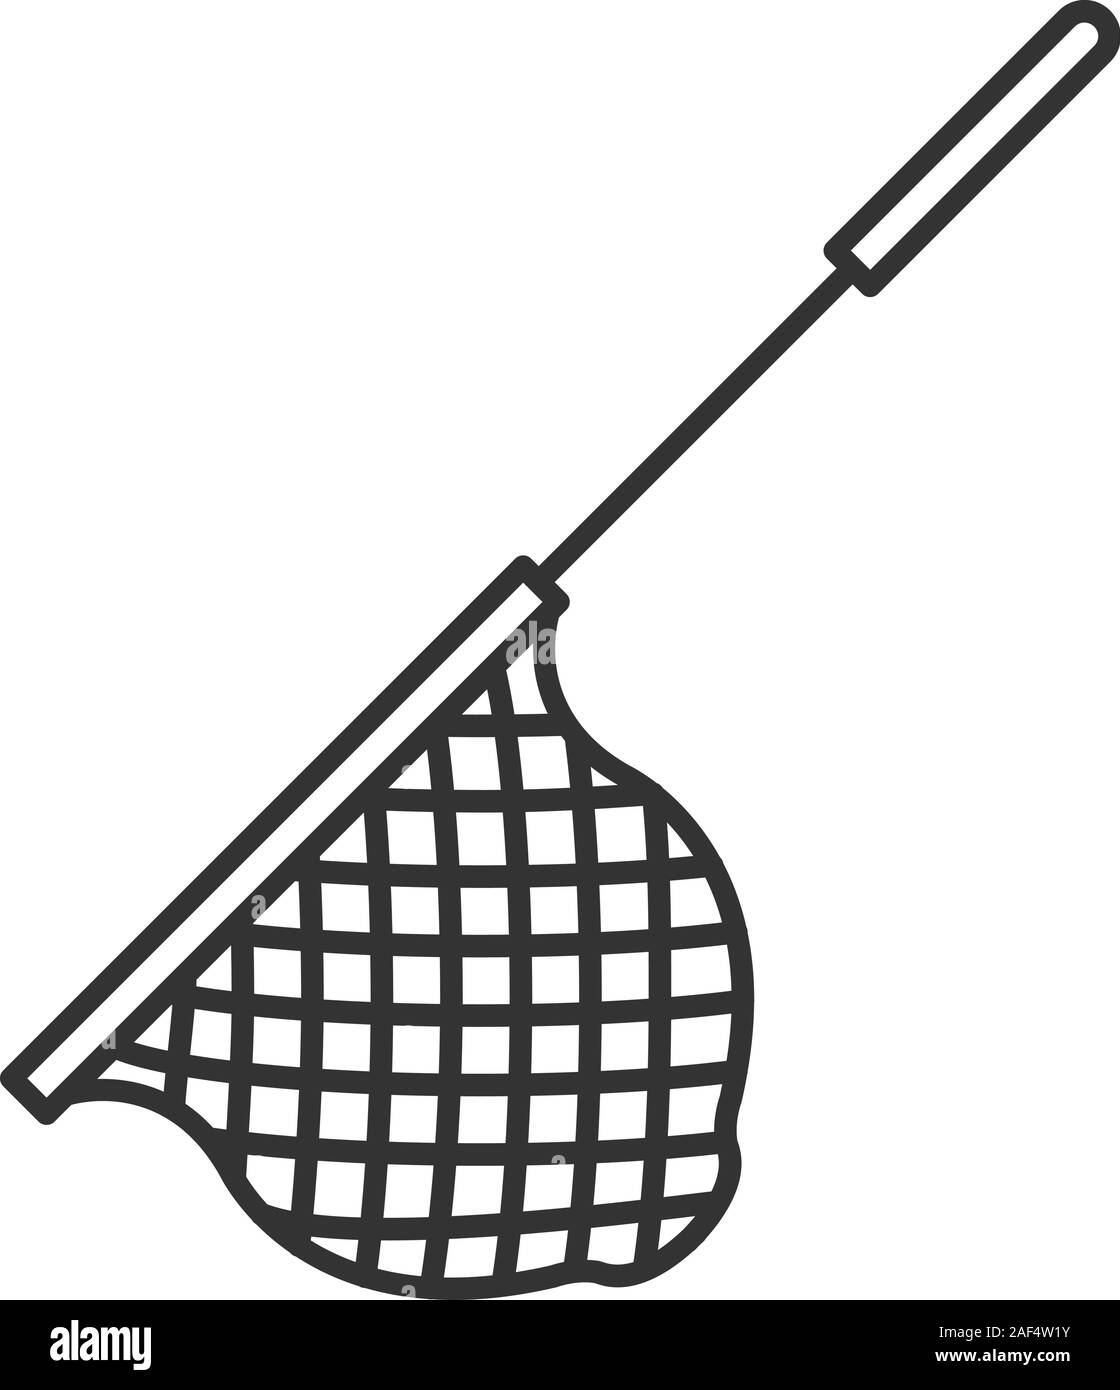 https://c8.alamy.com/comp/2AF4W1Y/scoop-net-linear-icon-thin-line-illustration-fishing-gear-hoop-net-contour-symbol-vector-isolated-outline-drawing-2AF4W1Y.jpg